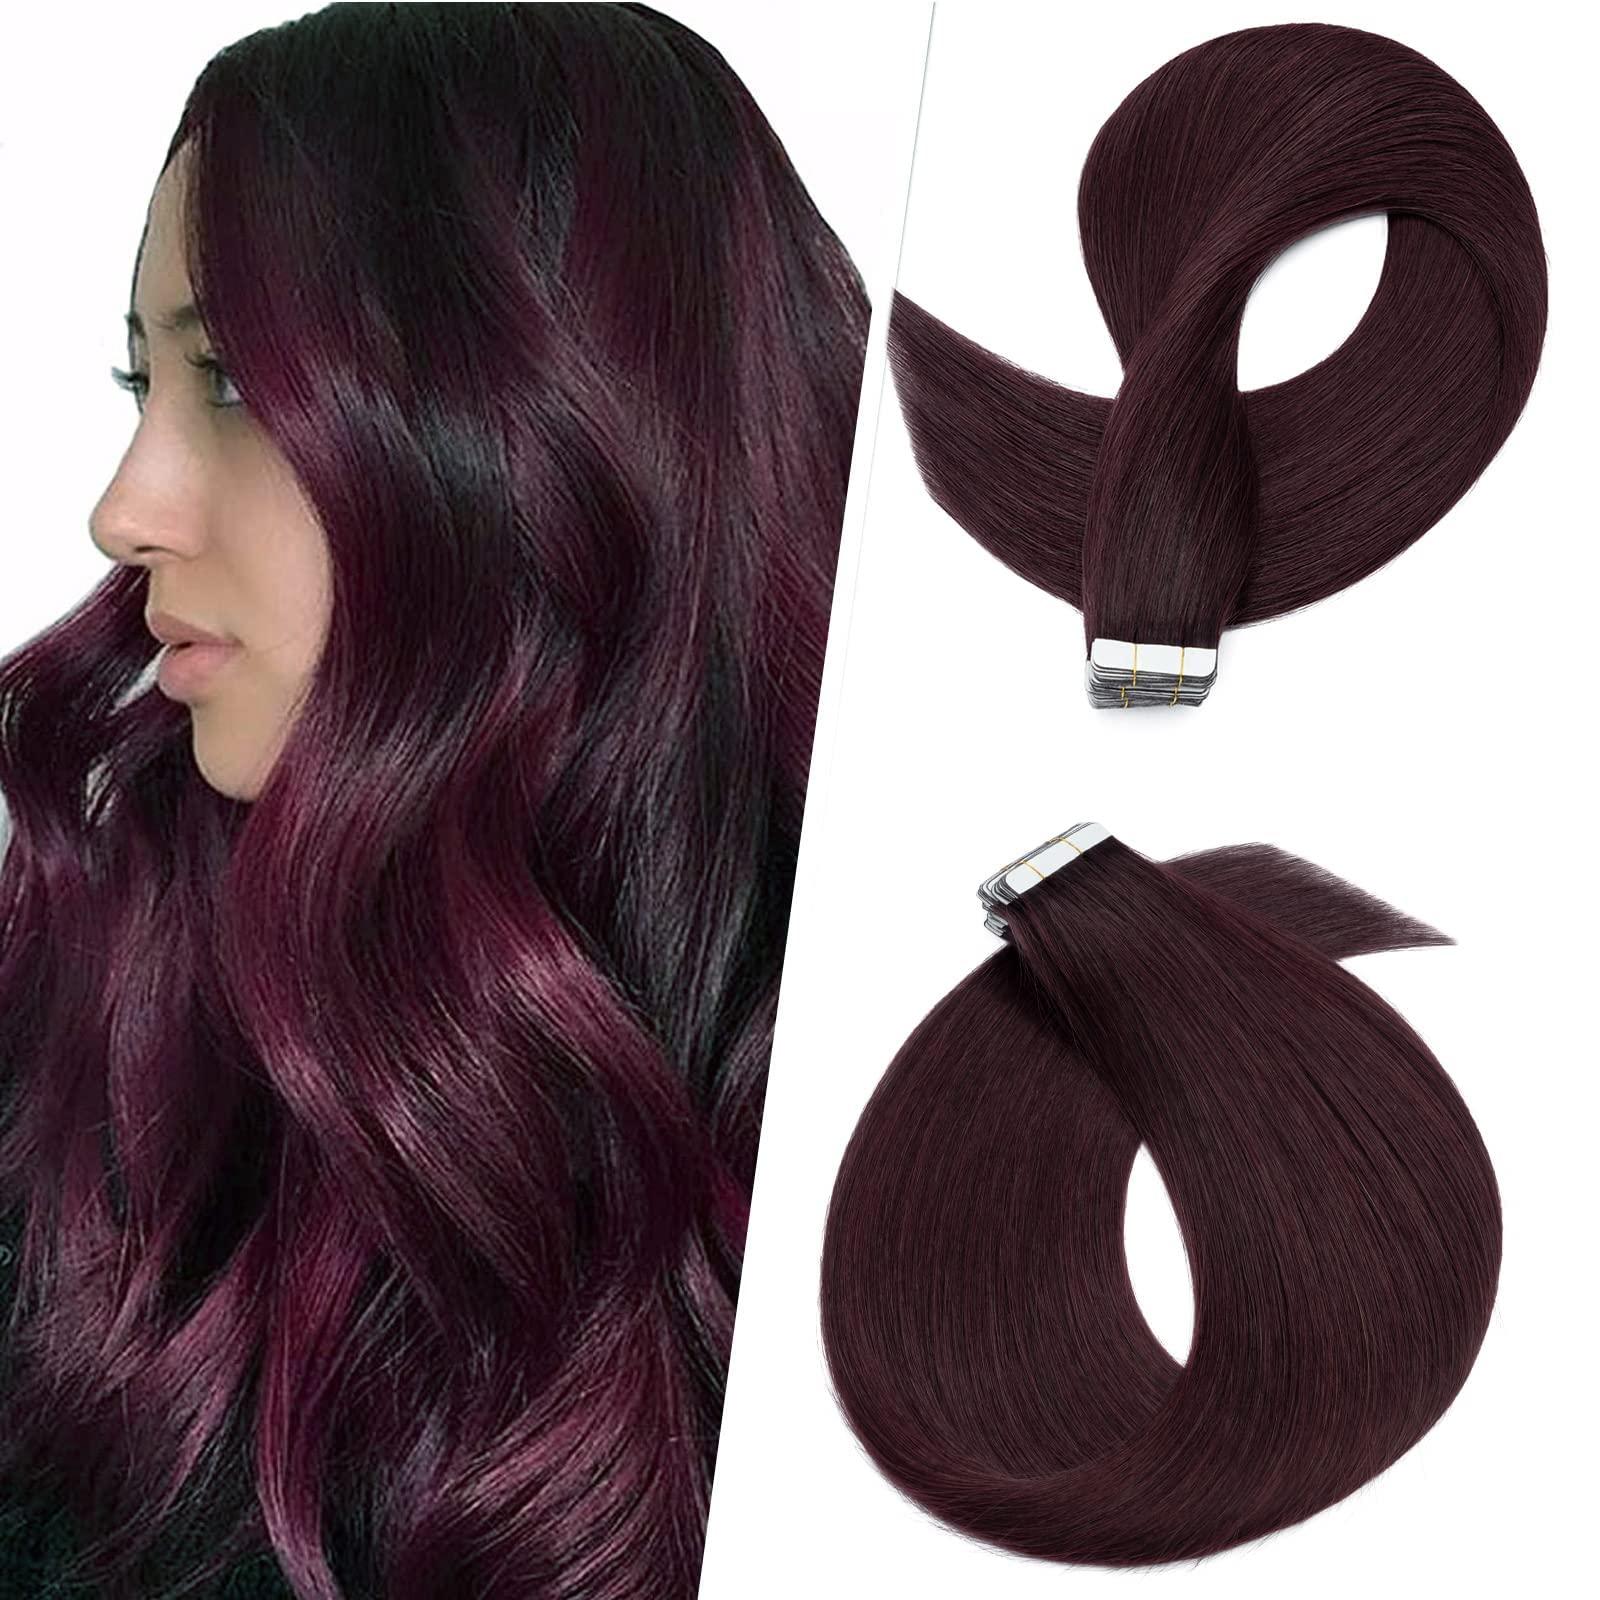 Silk-co 20pcs Tape in Hair Extensions 100% Remy Human Hair Straight Skin Weft Hair Extensions (12inch 40g, 20pcs/set, 99J Wine Red)